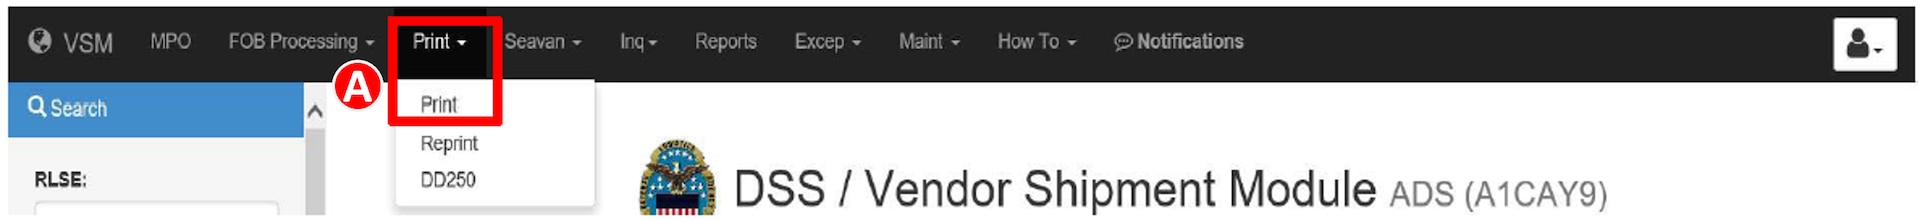 To print ready documents in Vendor Shipment Module select the Print dropdown arrow from navigation bar and then Print option.